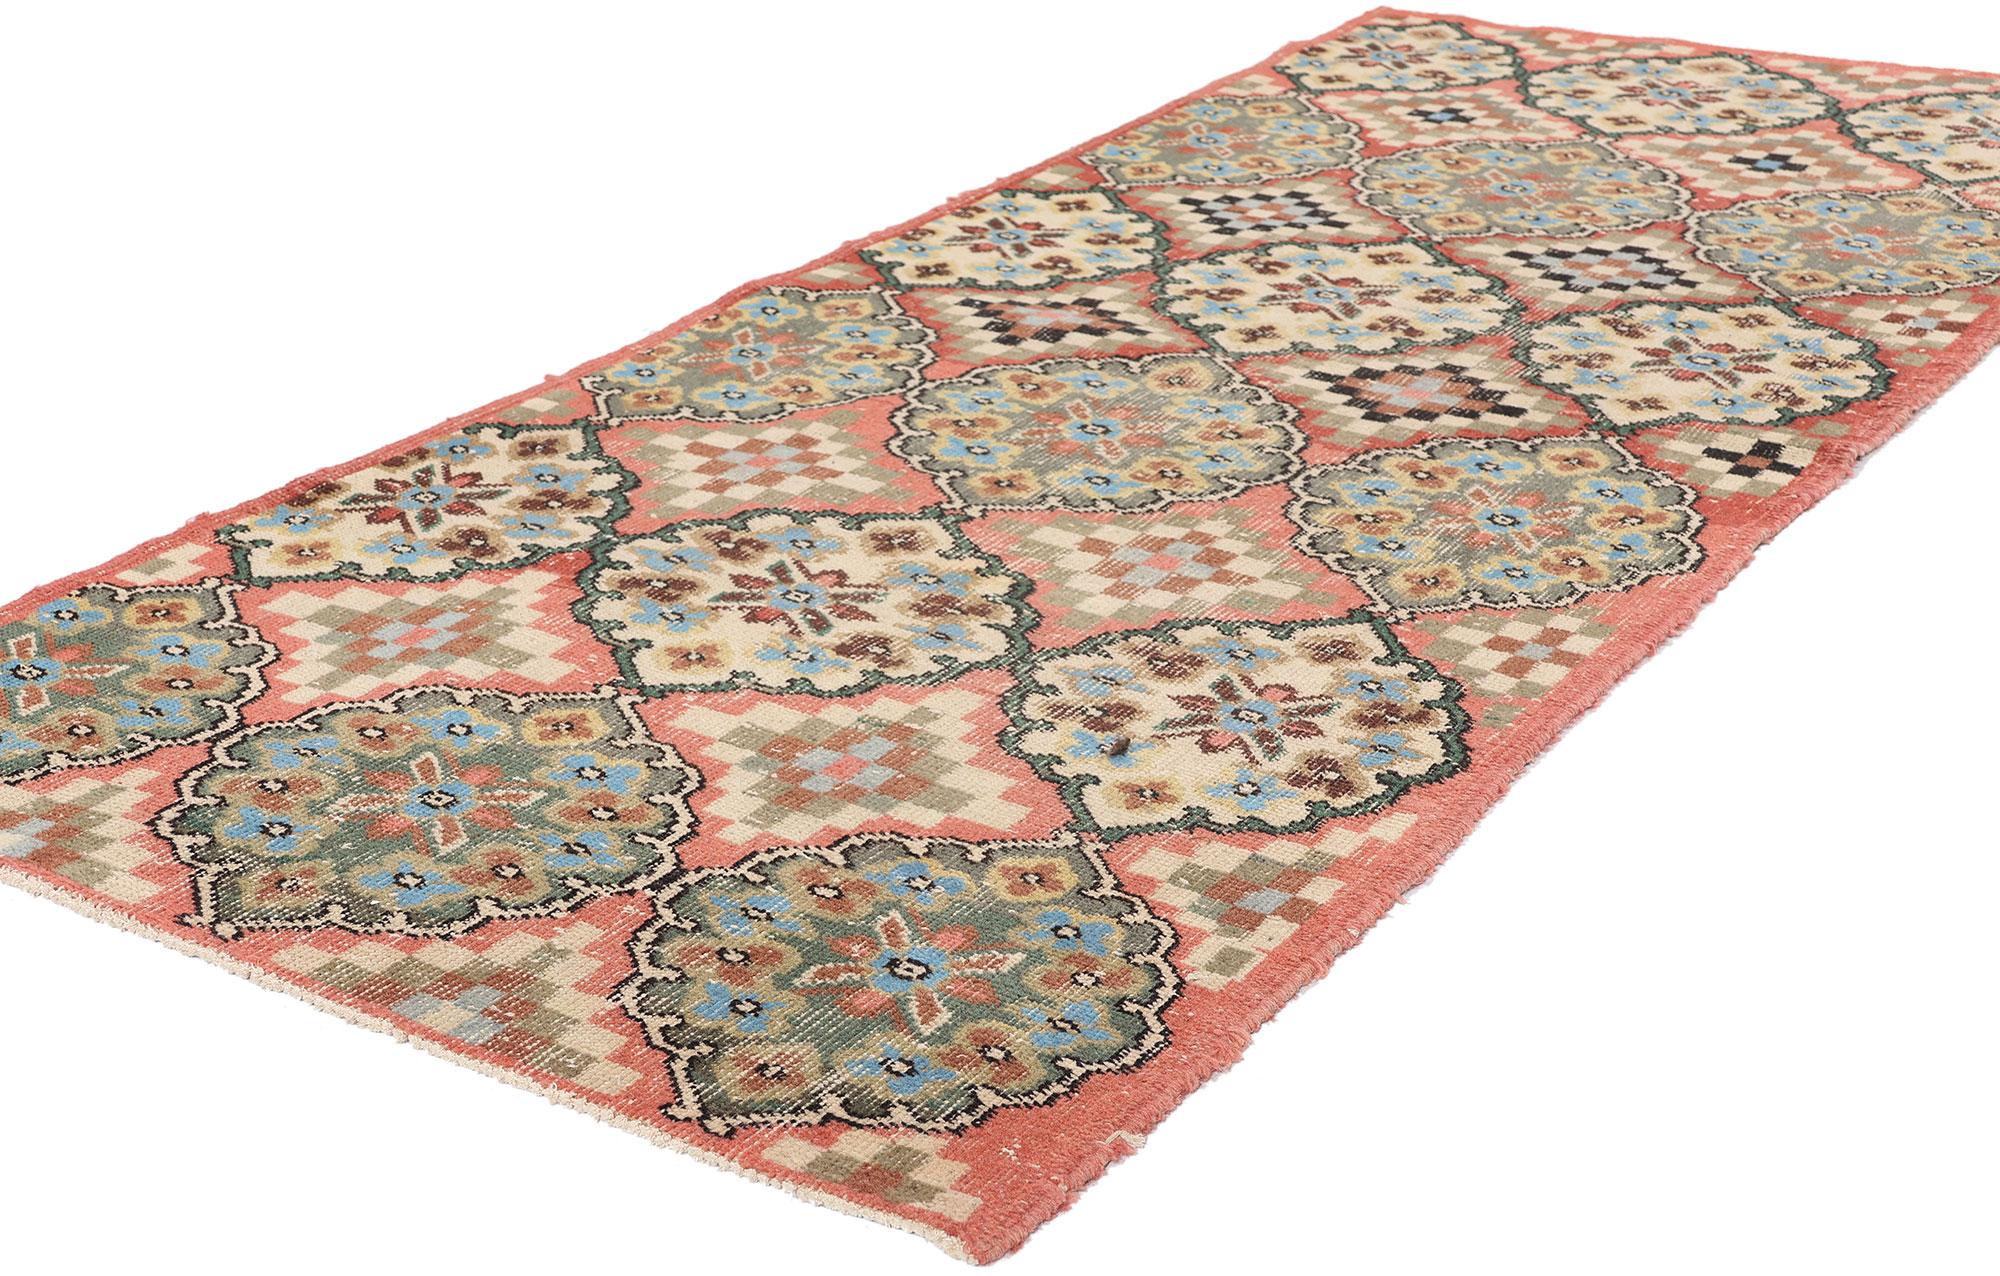 52013 Zeki Muren Vintage Turkish Sivas Rug, 03’00 x 07’02. Nestled amidst the serene landscapes of Turkey's Sivas region, Zeki Muren Turkish Sivas rugs pay homage to the revered Turkish singer whose legacy continues to inspire. Celebrated for their